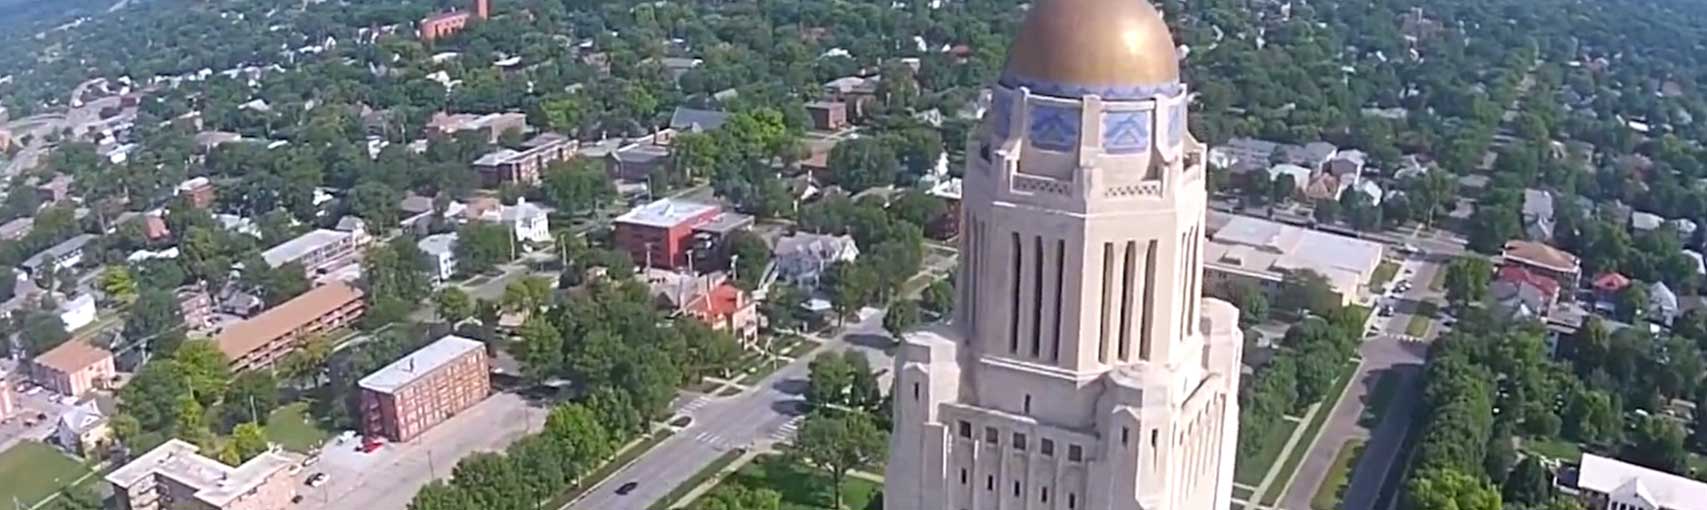 The Nebraska State Capitol stands proud amongst the buildings of Lincoln.